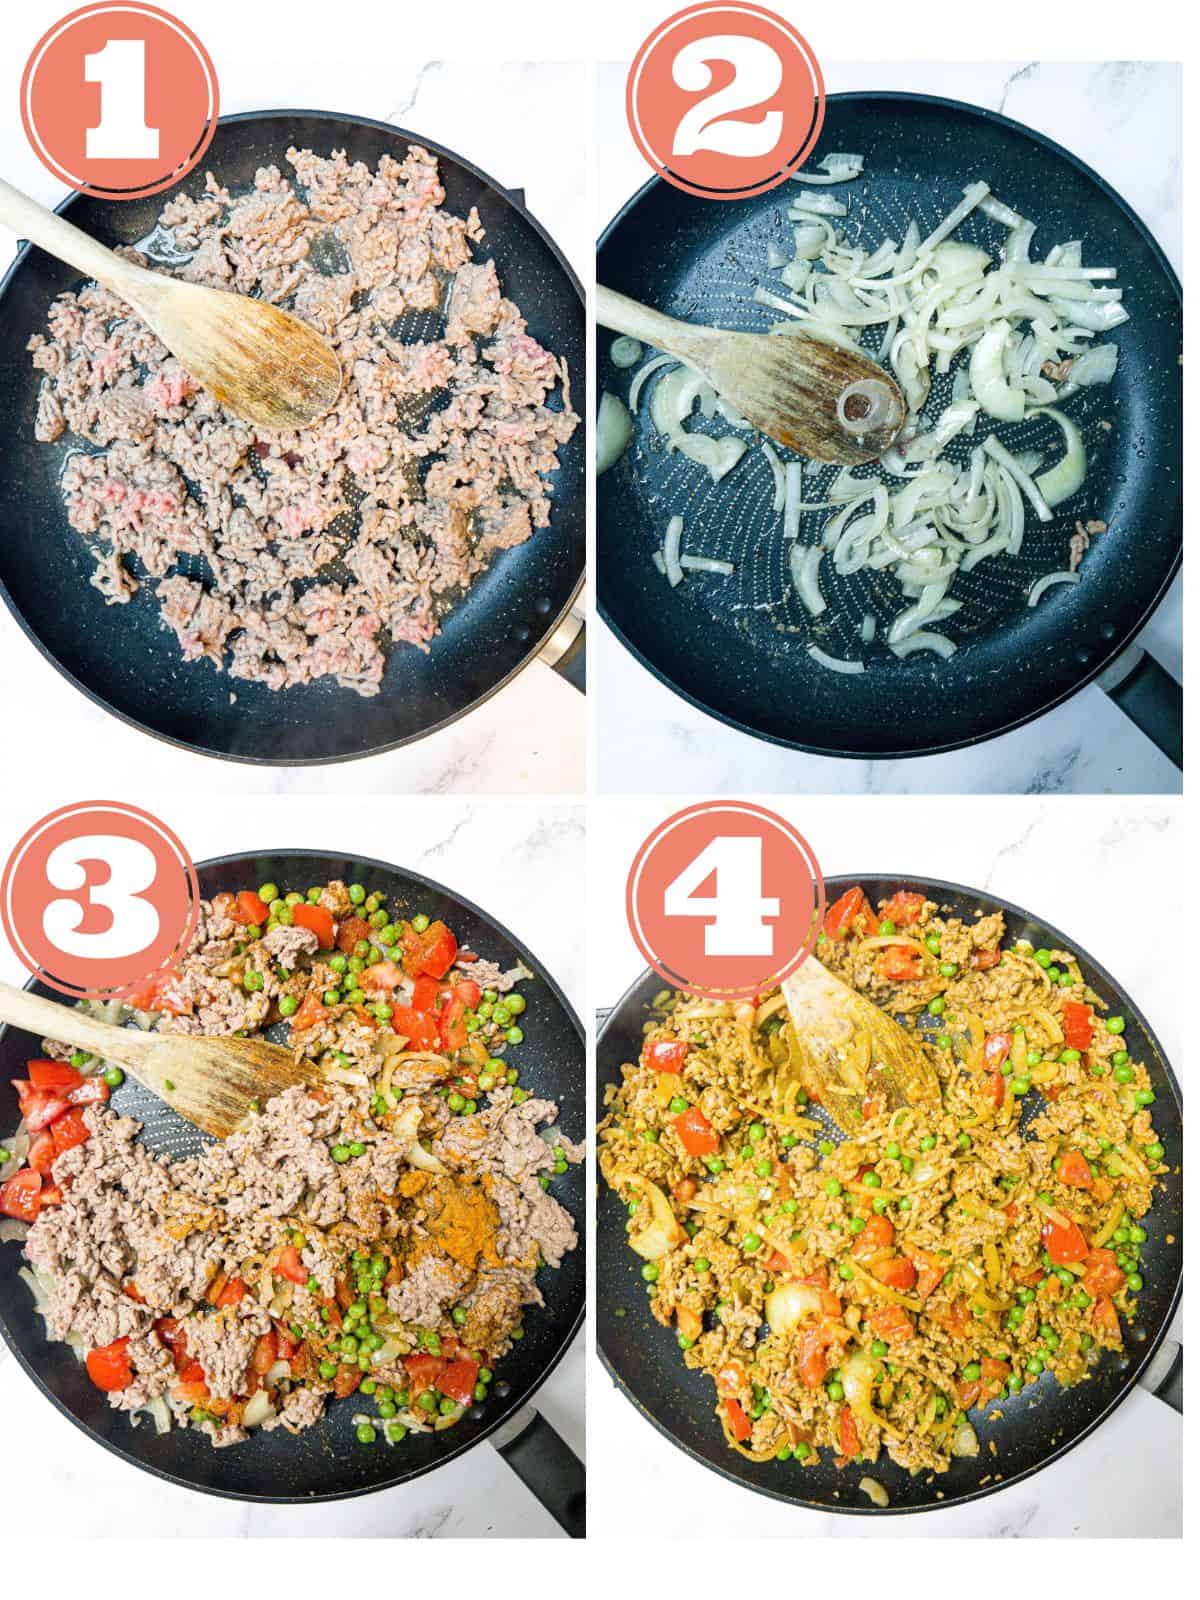 Steps showing how to make keema rice in a frying pan.